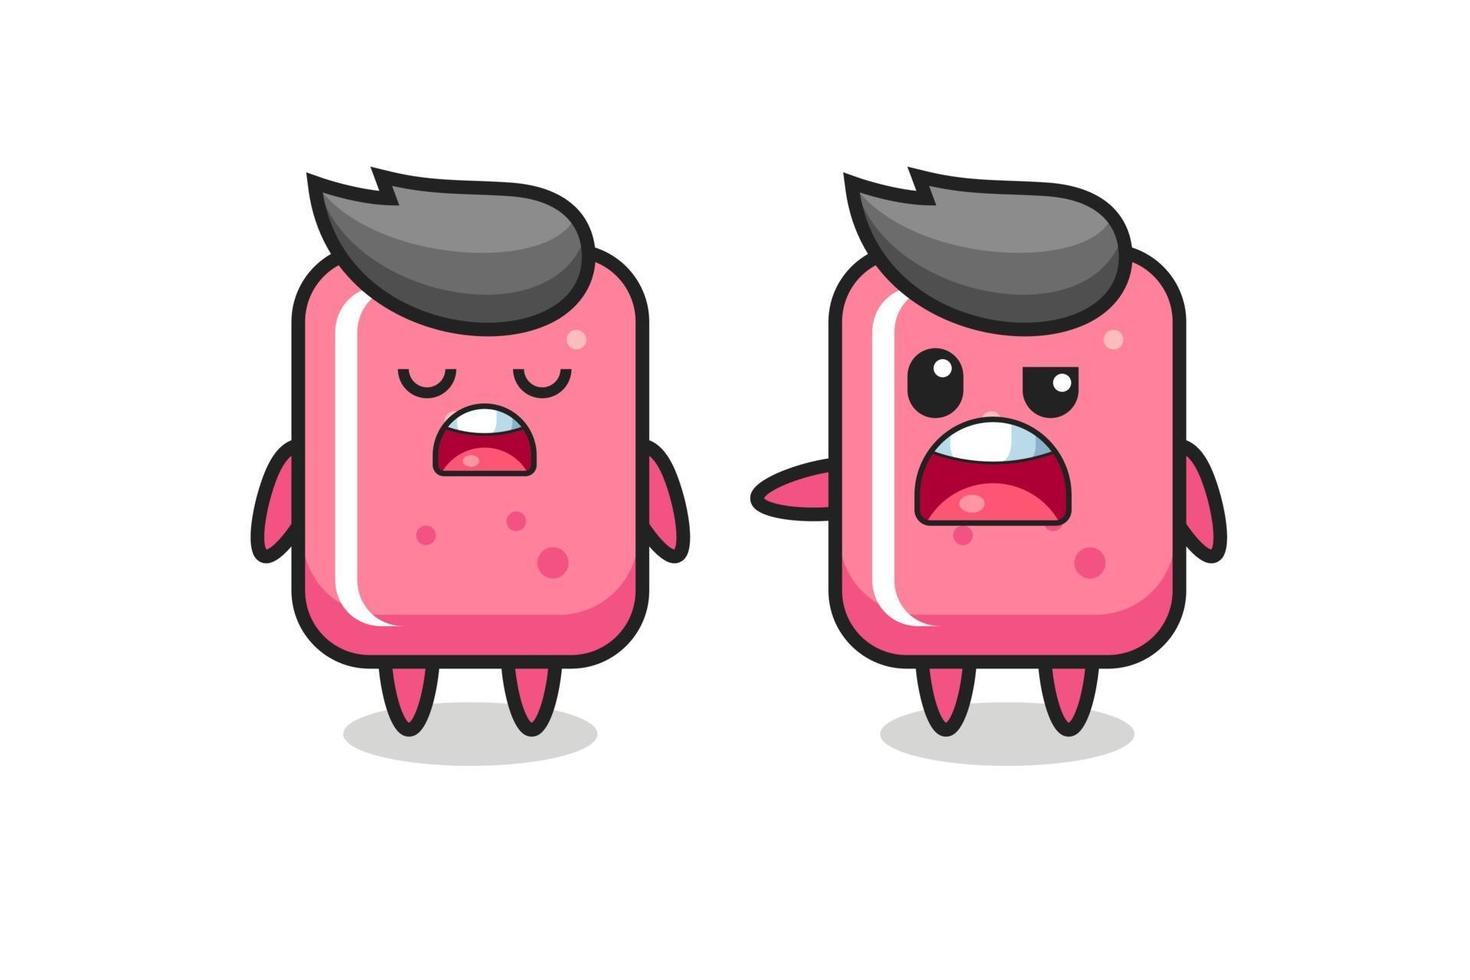 illustration of the argue between two cute bubble gum characters vector